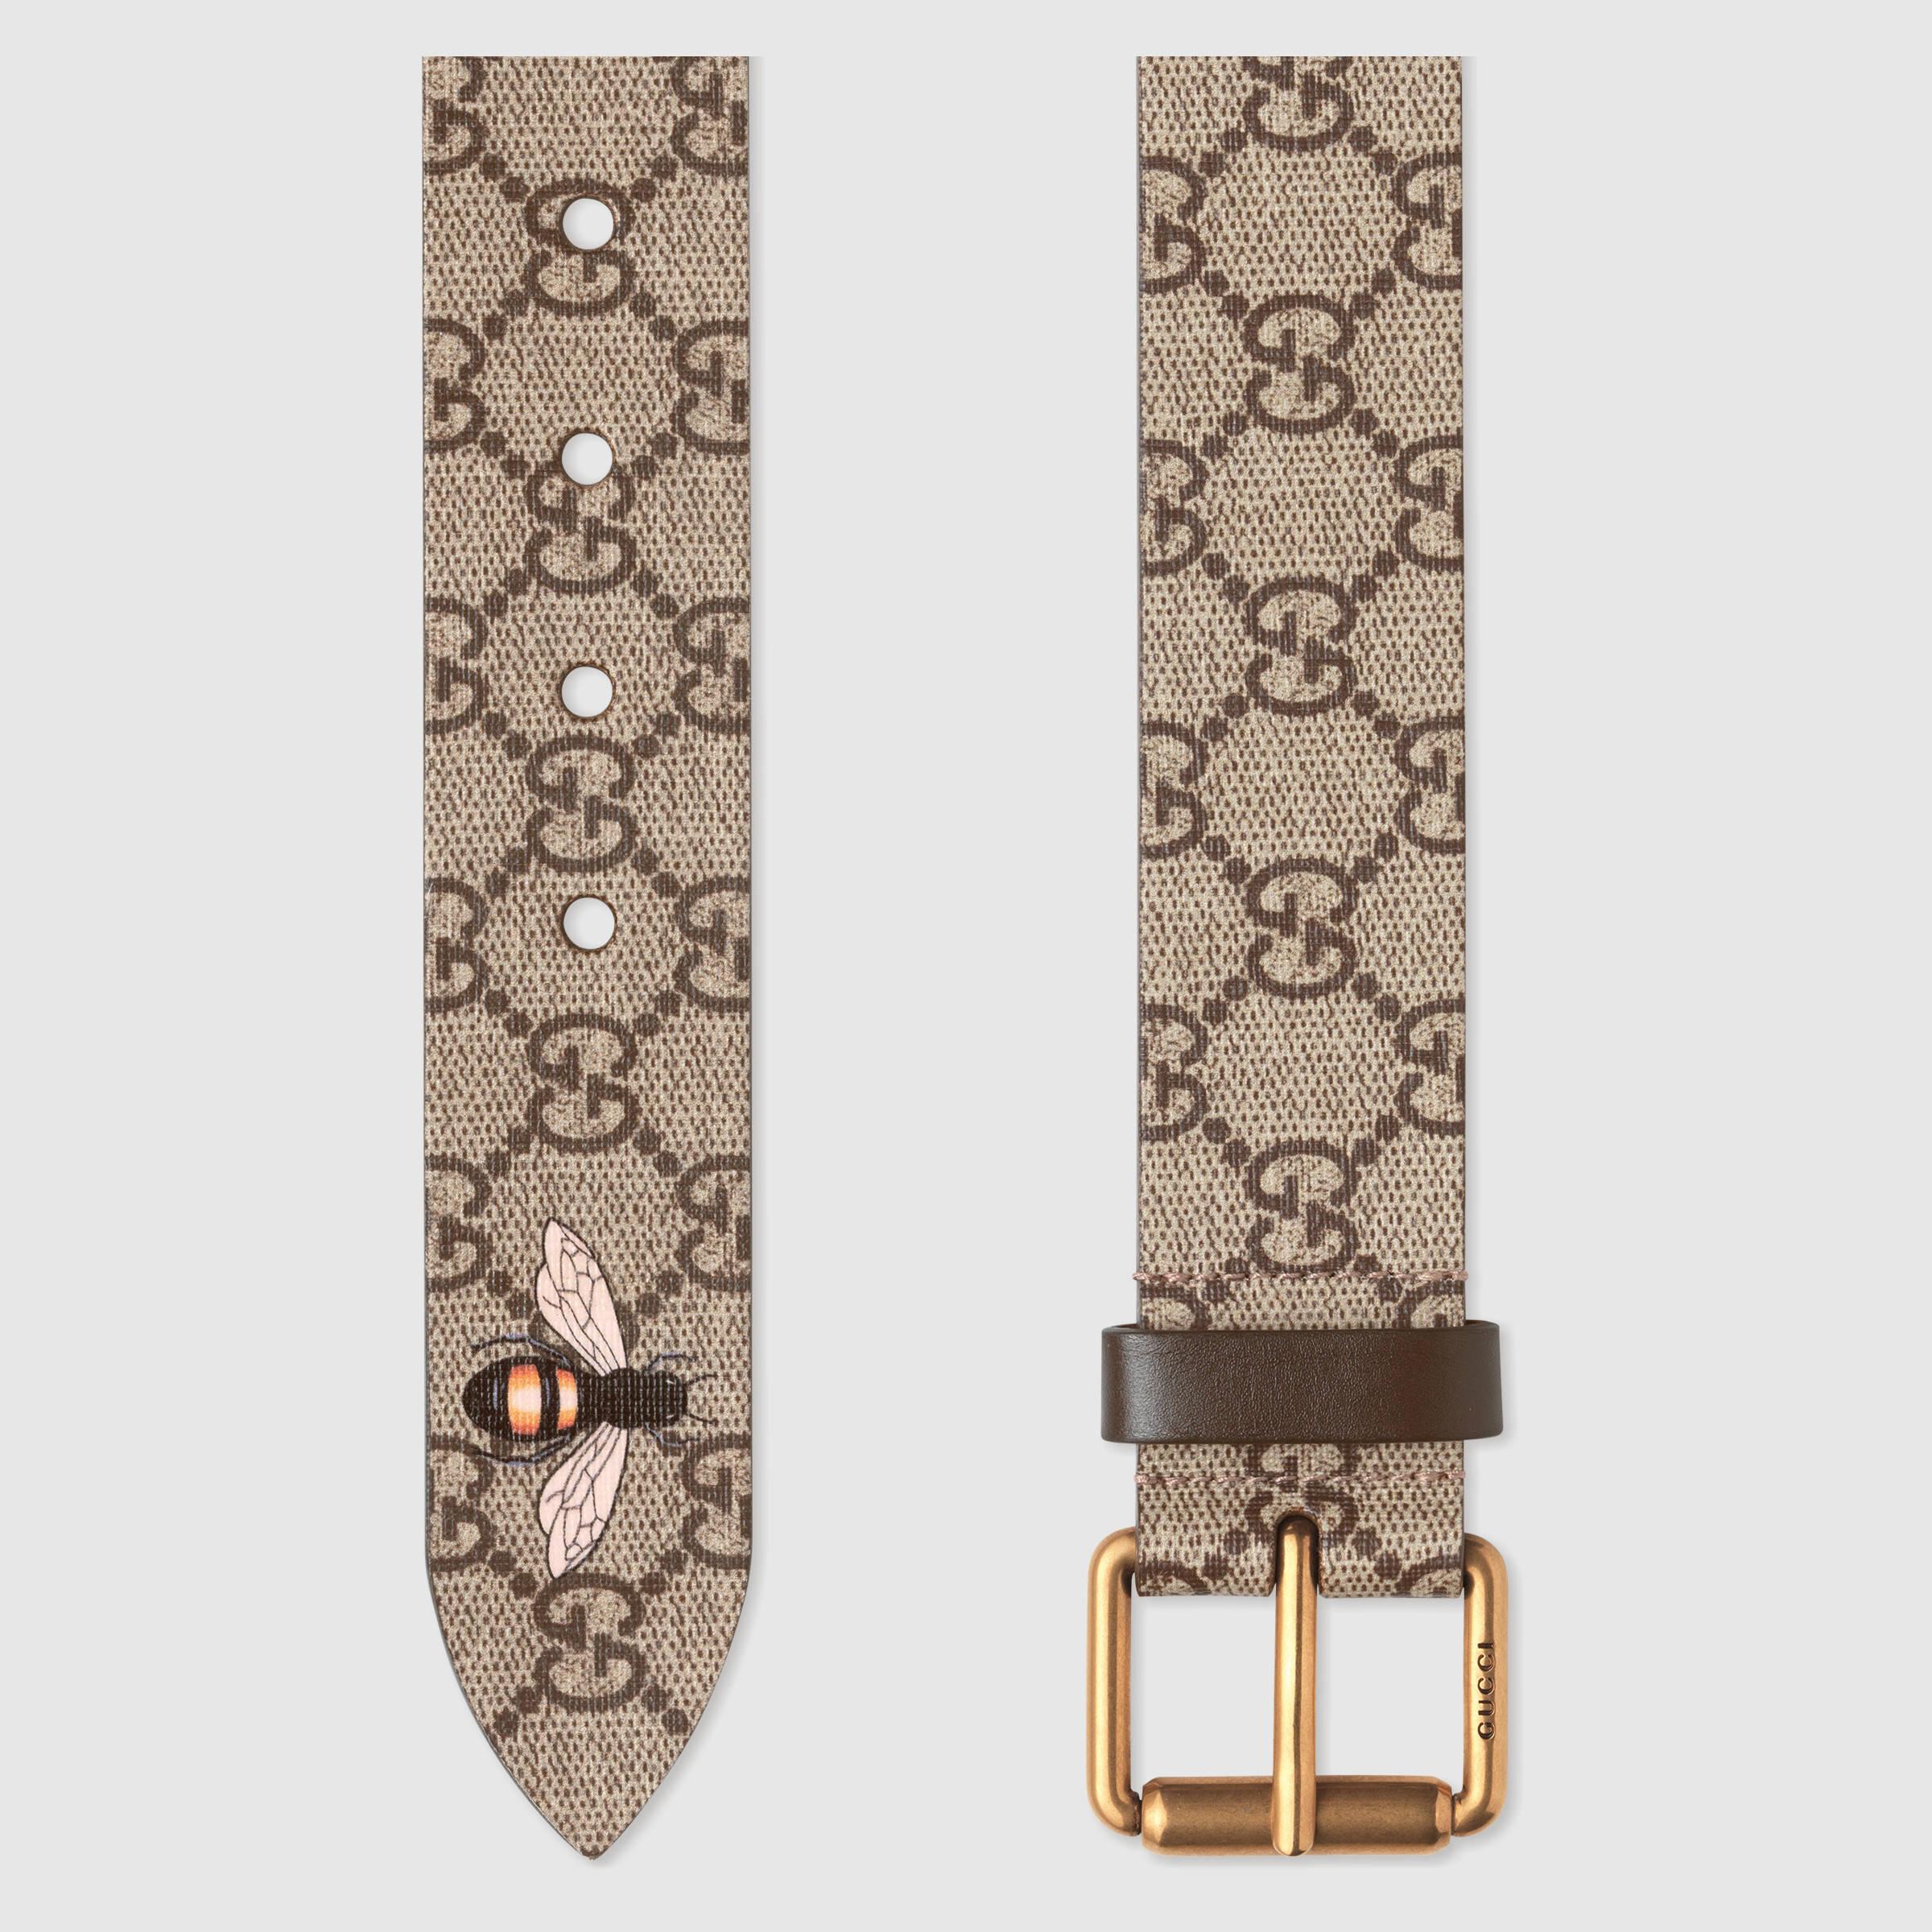 Lyst - Gucci Bee Print Gg Supreme for Men